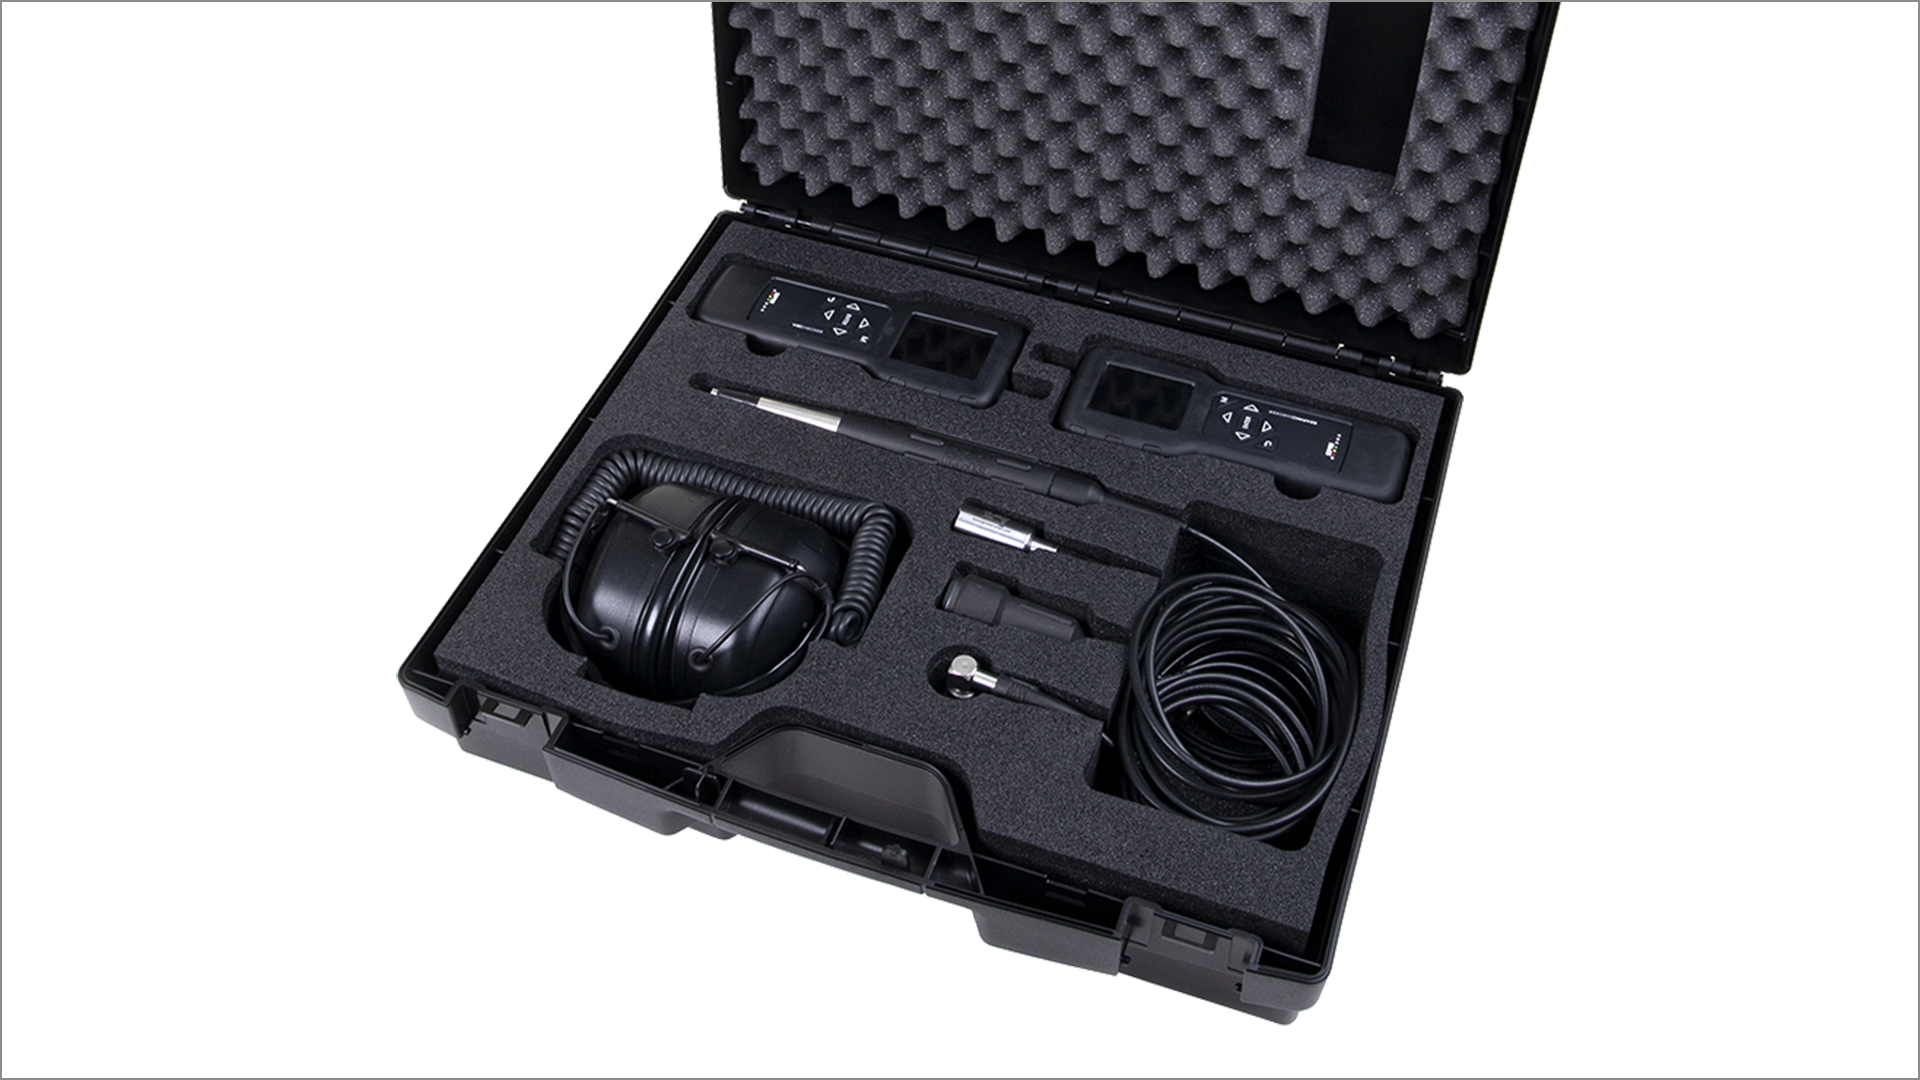 Open carrying case CAS29, including portable instruments and accessories